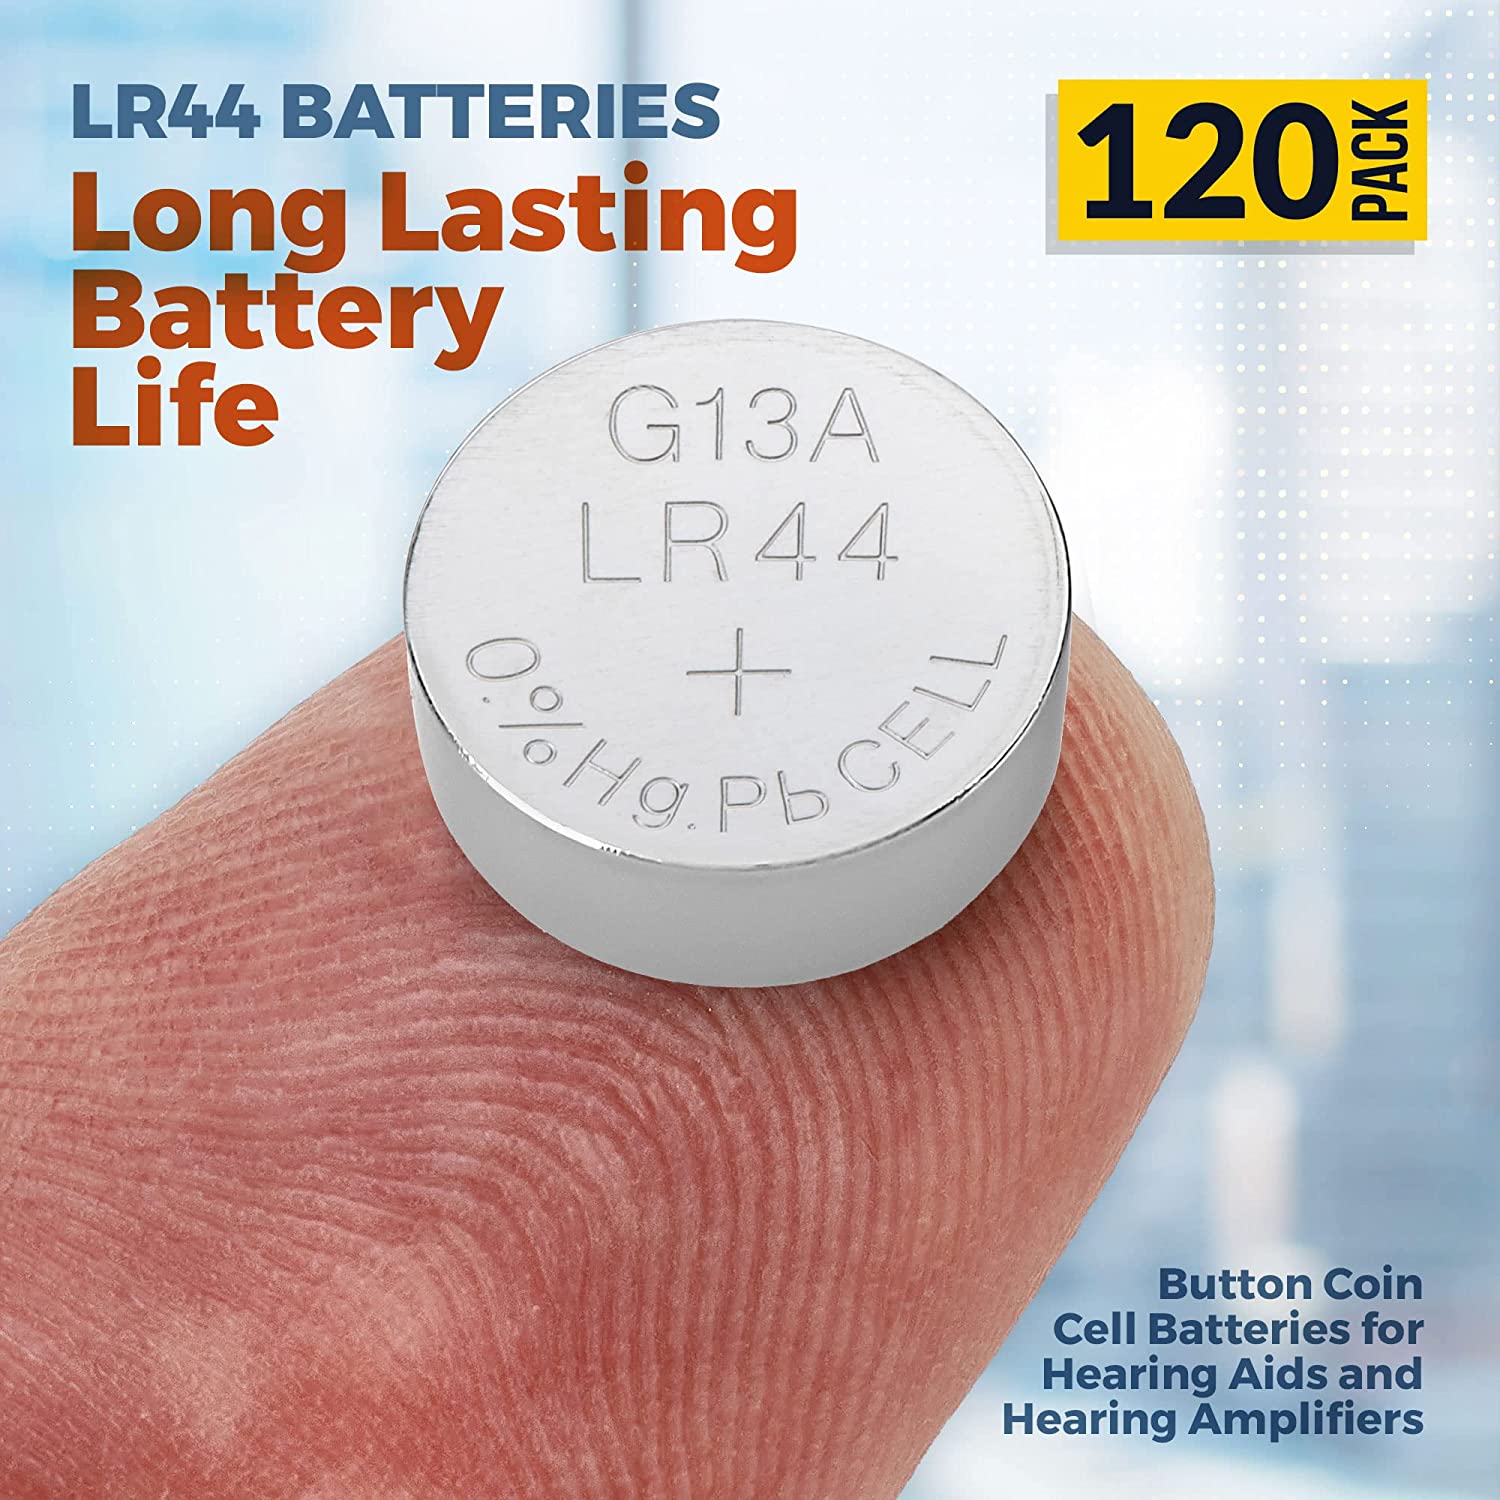 Hearing Aids and Hearing Amplifiers Battery Button Coin Cell 120 Count Pack